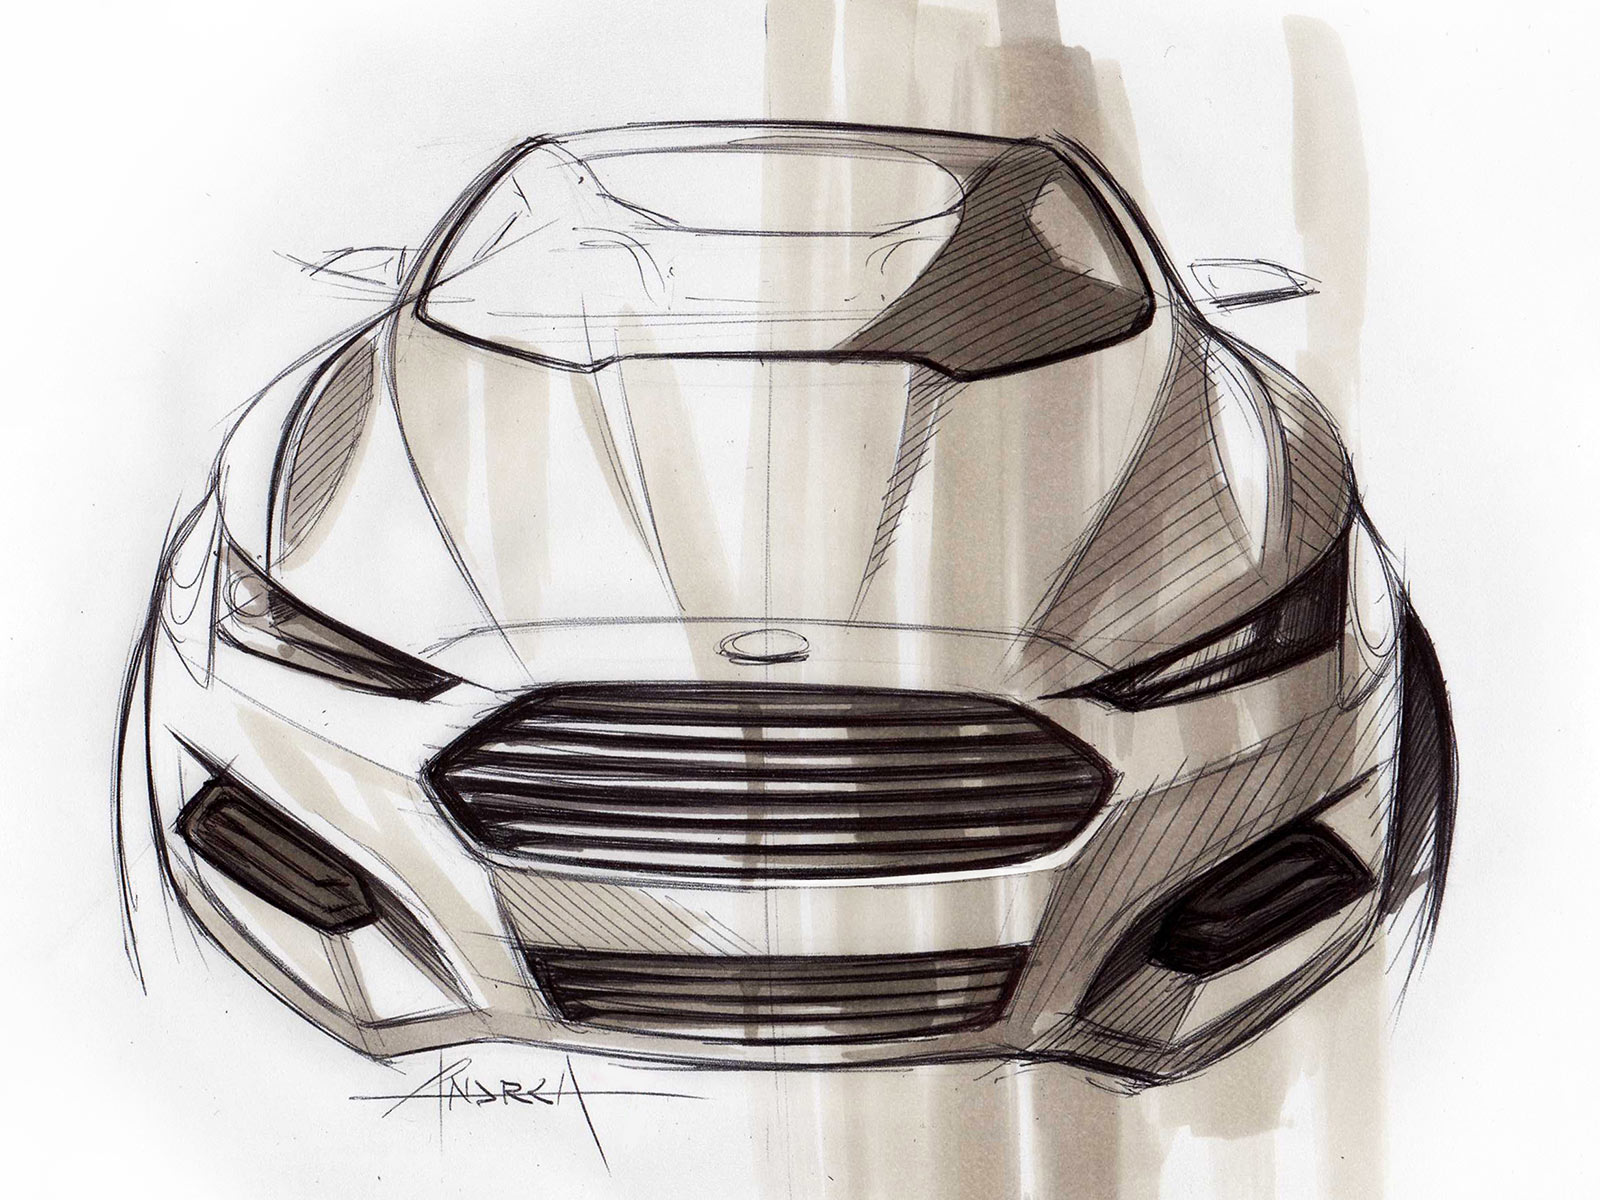 S650 Mustang First Look: S650 Mustang Prototype Spied With Production Body! 📸 Ford-Fusion-Design-Sketch-by-Andrea-di-Buduo